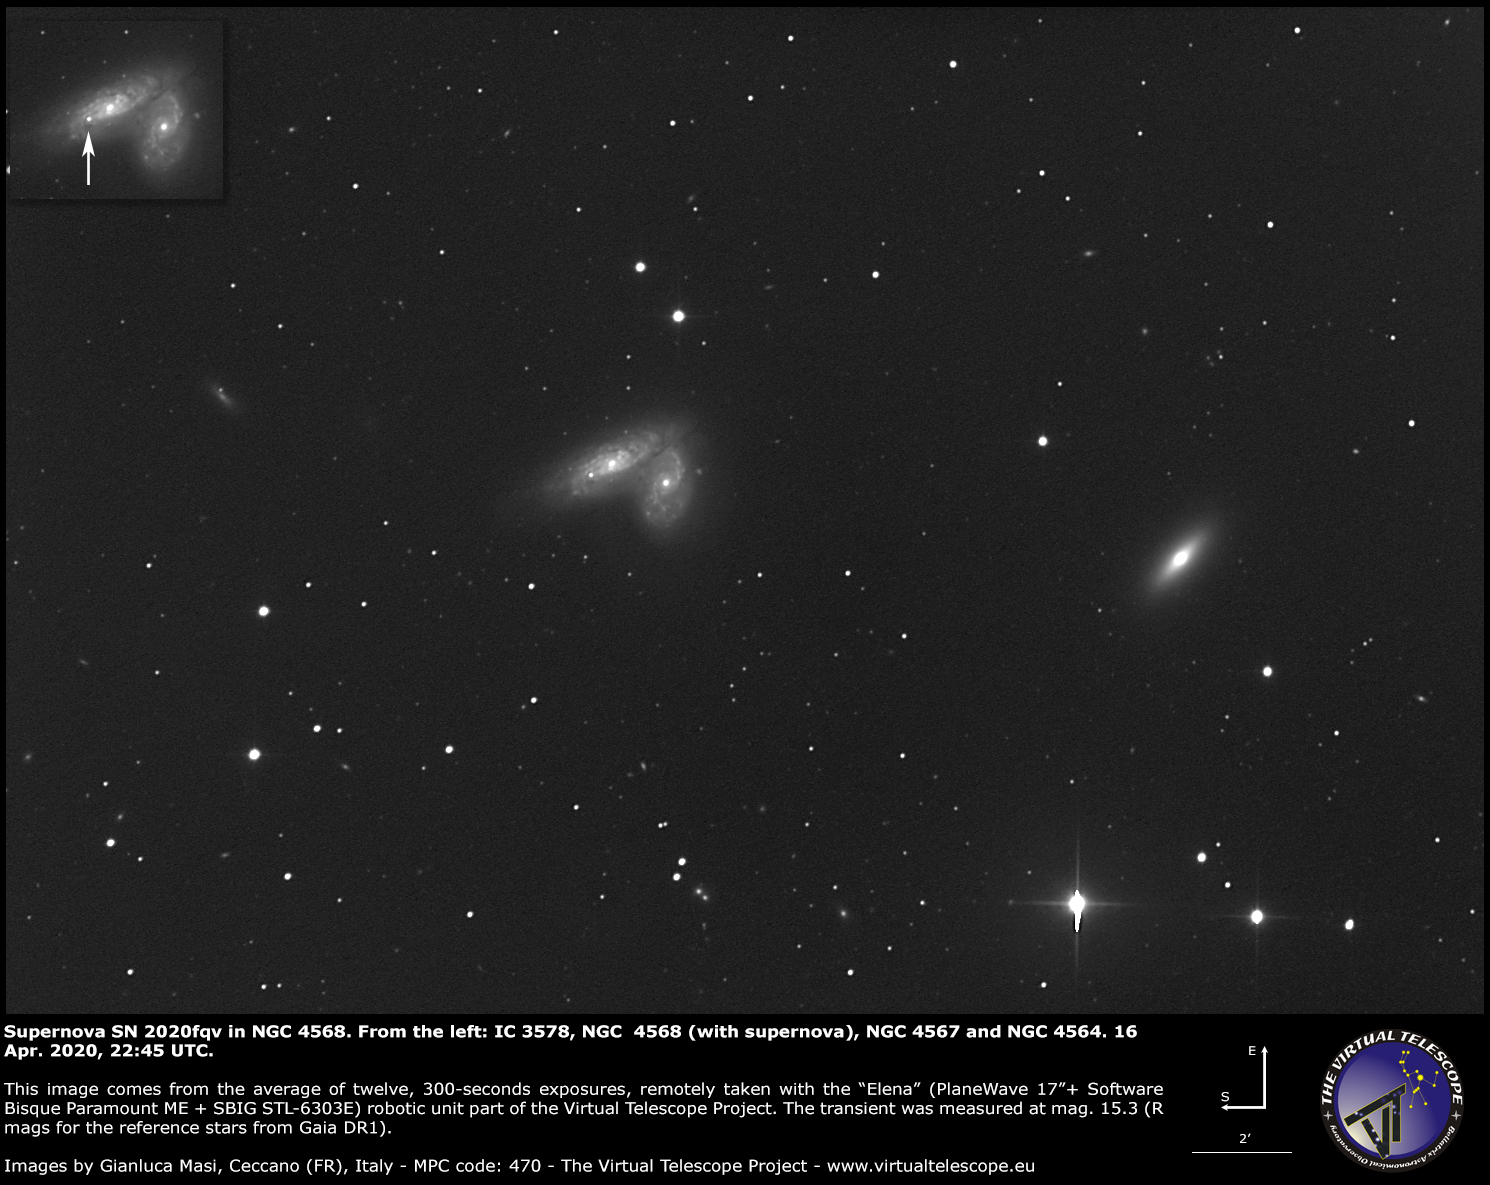 Supernova SN 2020fqv in NGC 4568: a image - 16 Apr. 2020